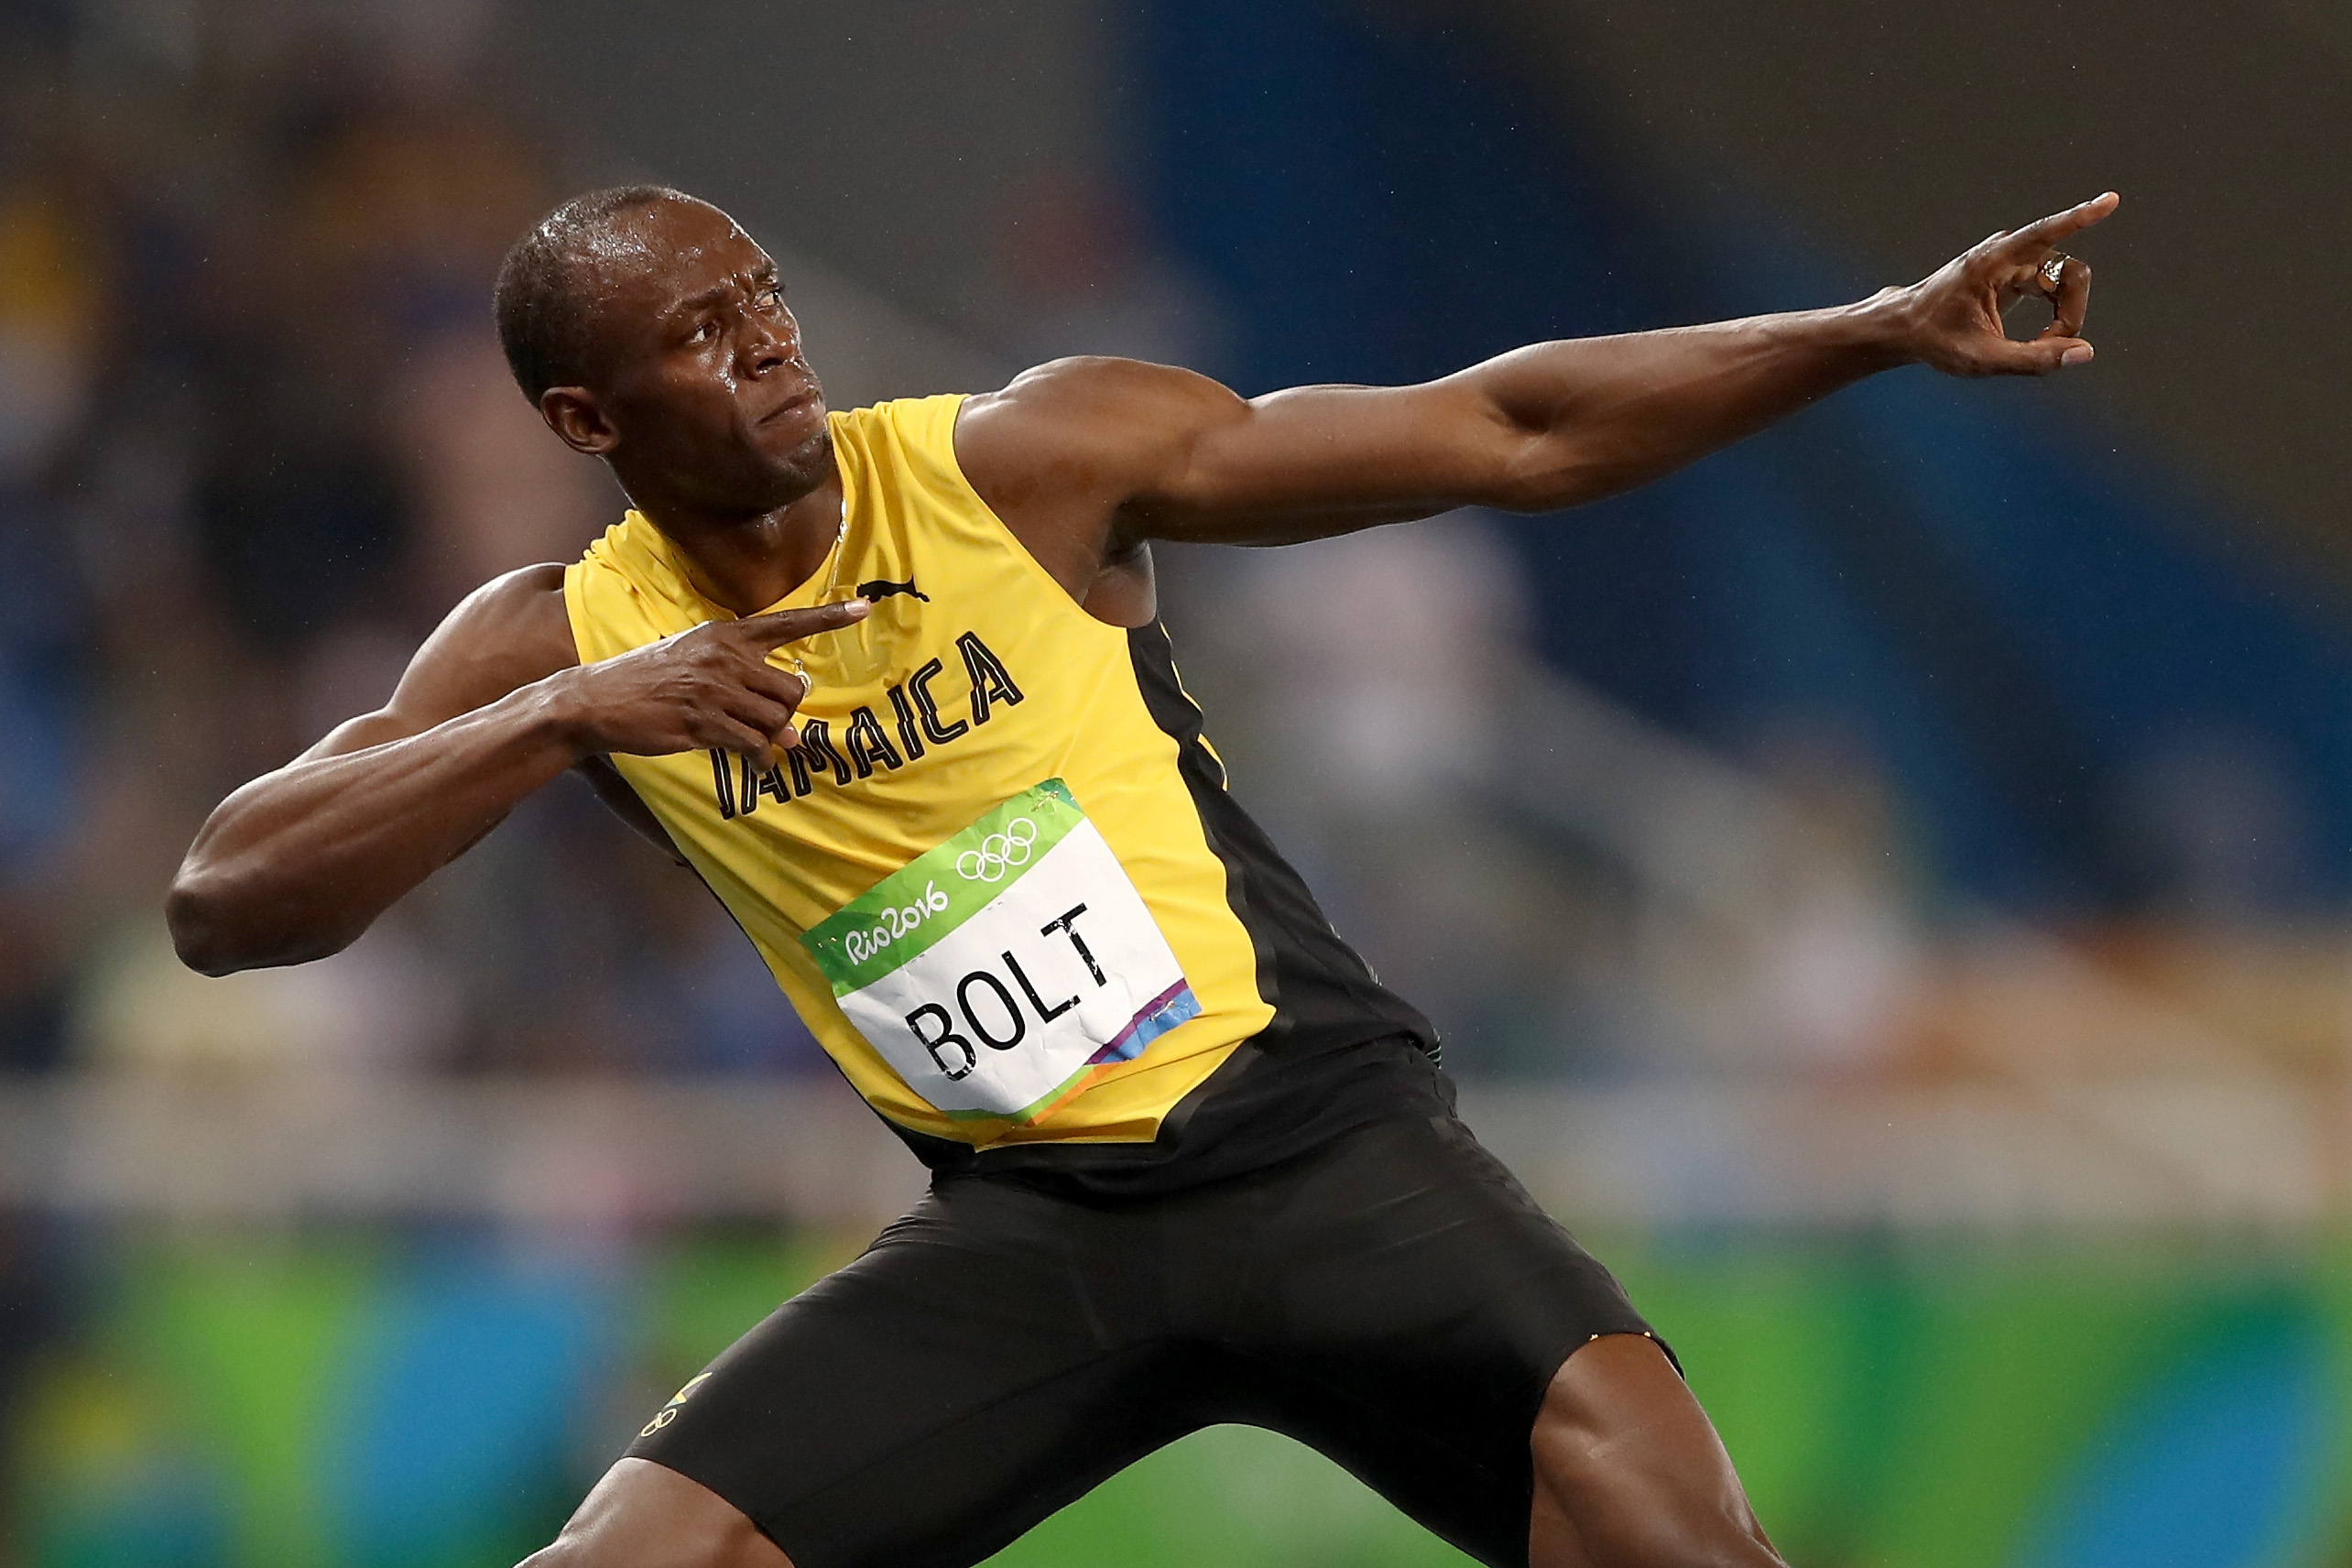 Usain Bolt Moves to File TM Application for His Signature Victory Pose